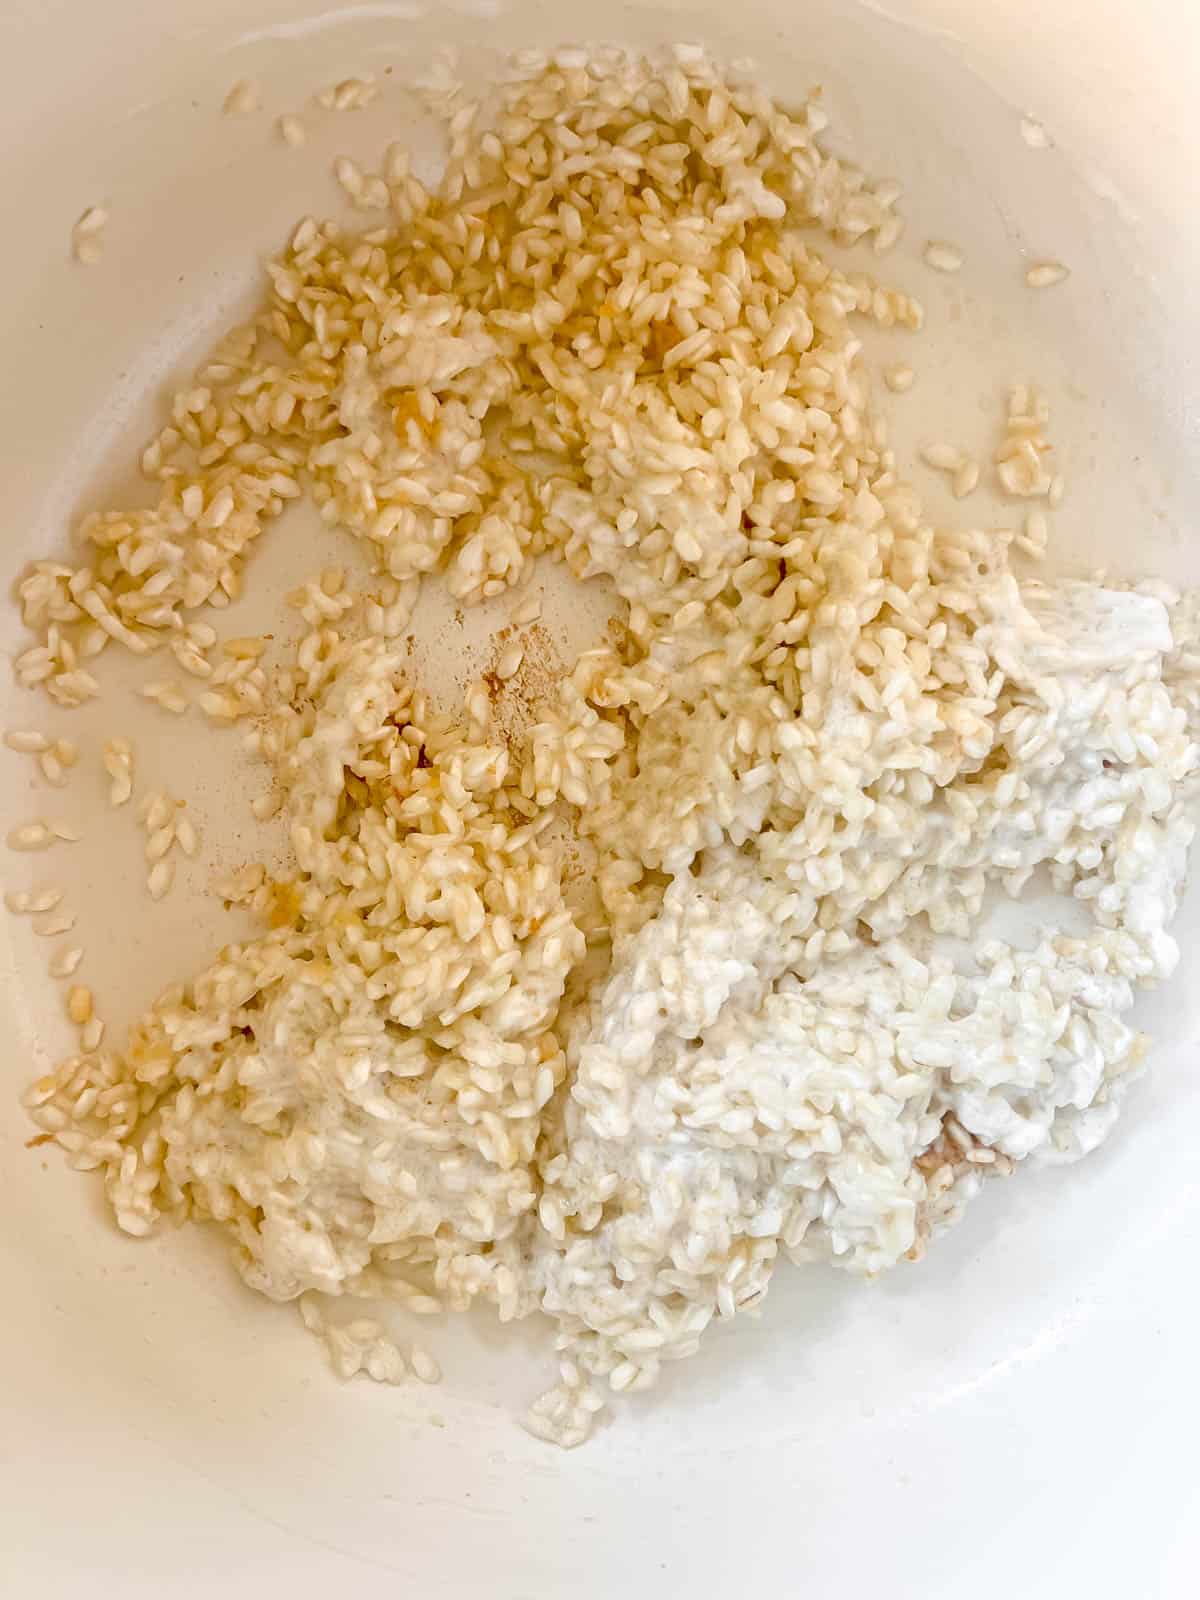 Coconut cream added to the rice.